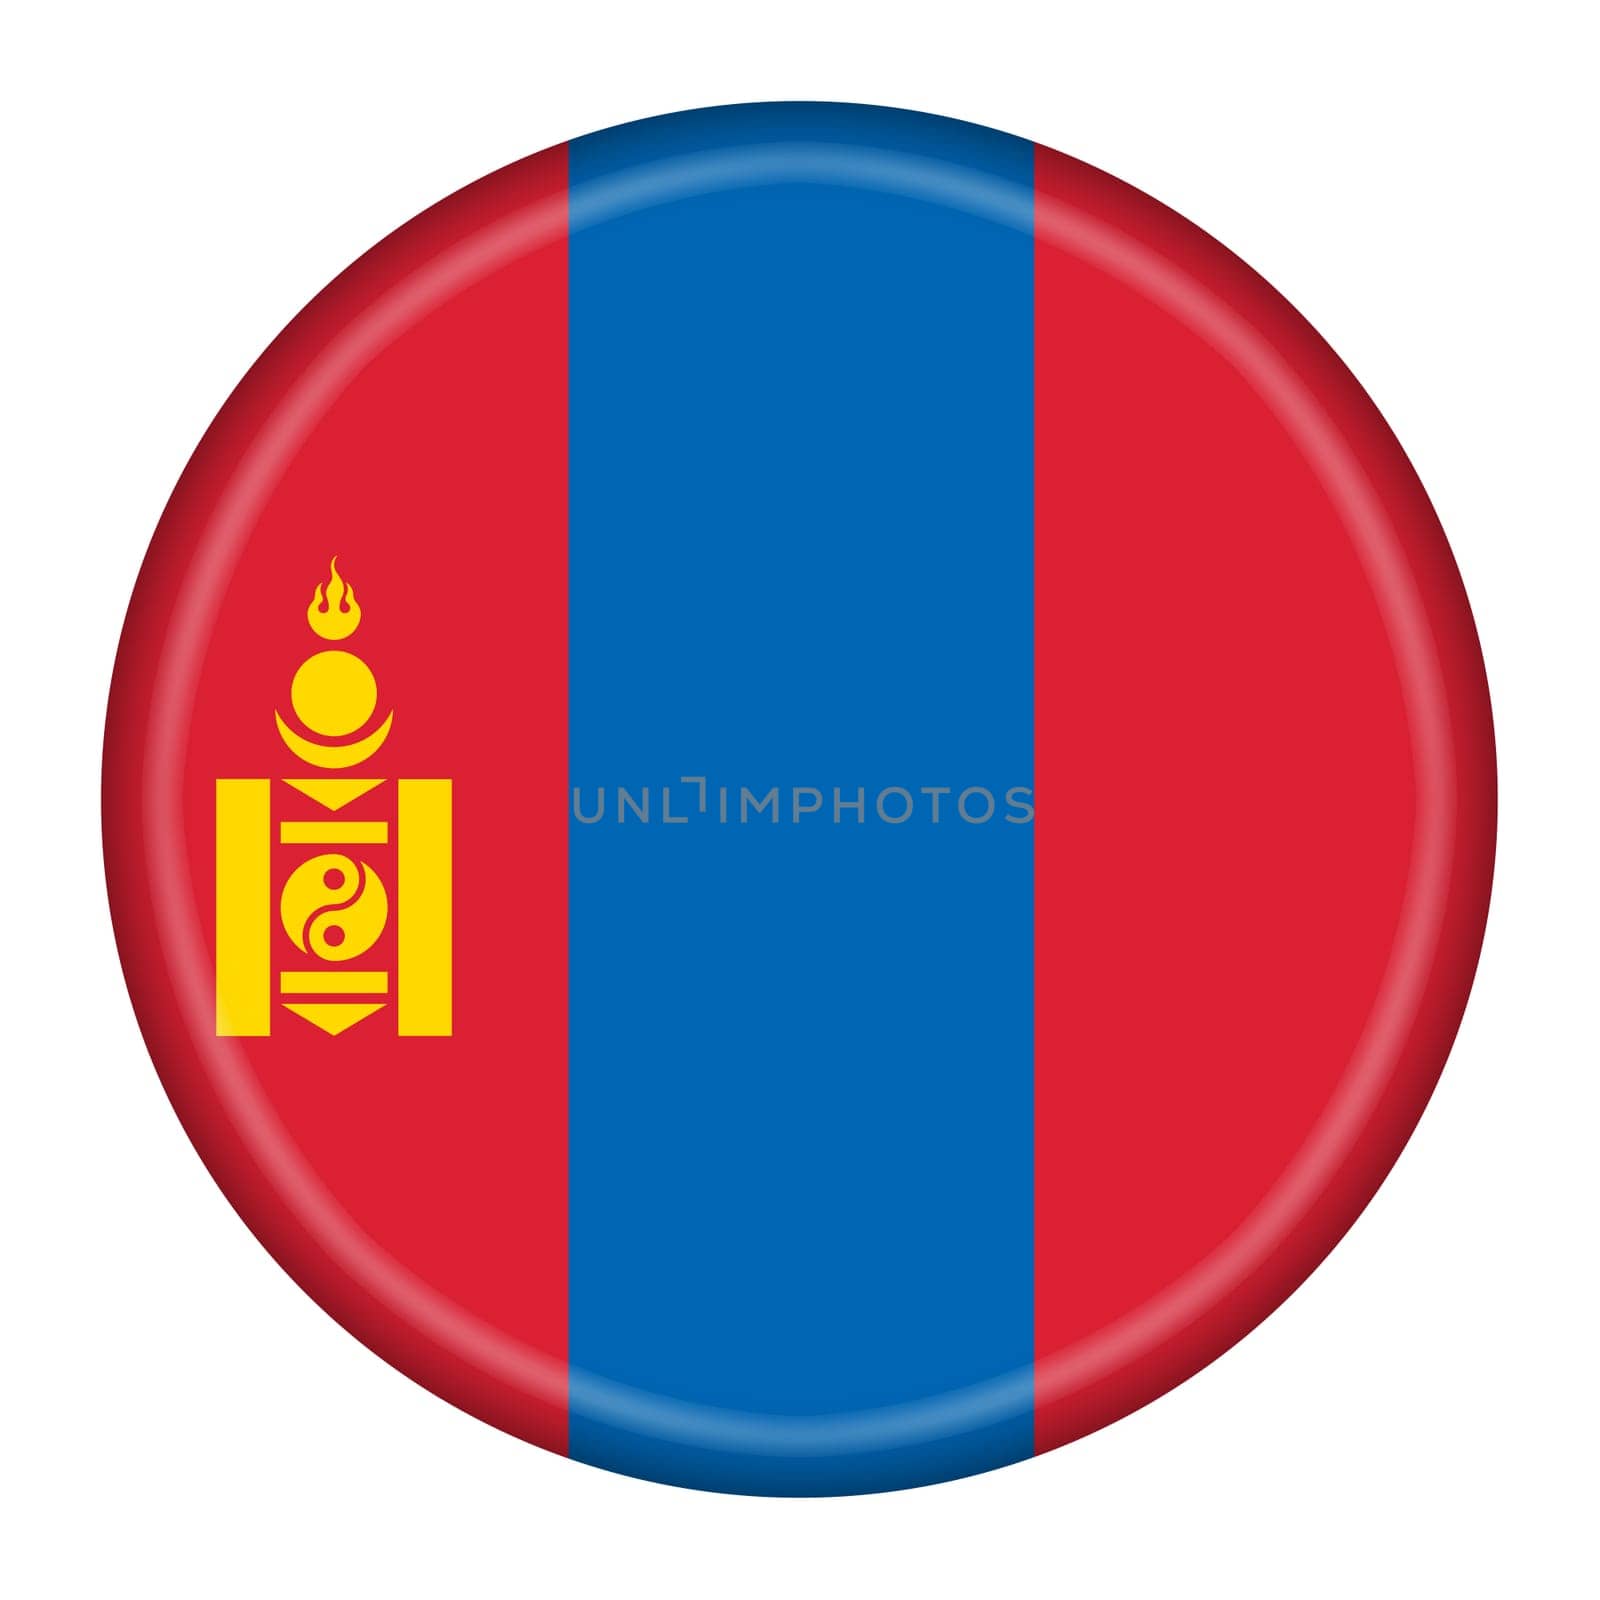 A Mongolia flag button 3d illustration with clipping path